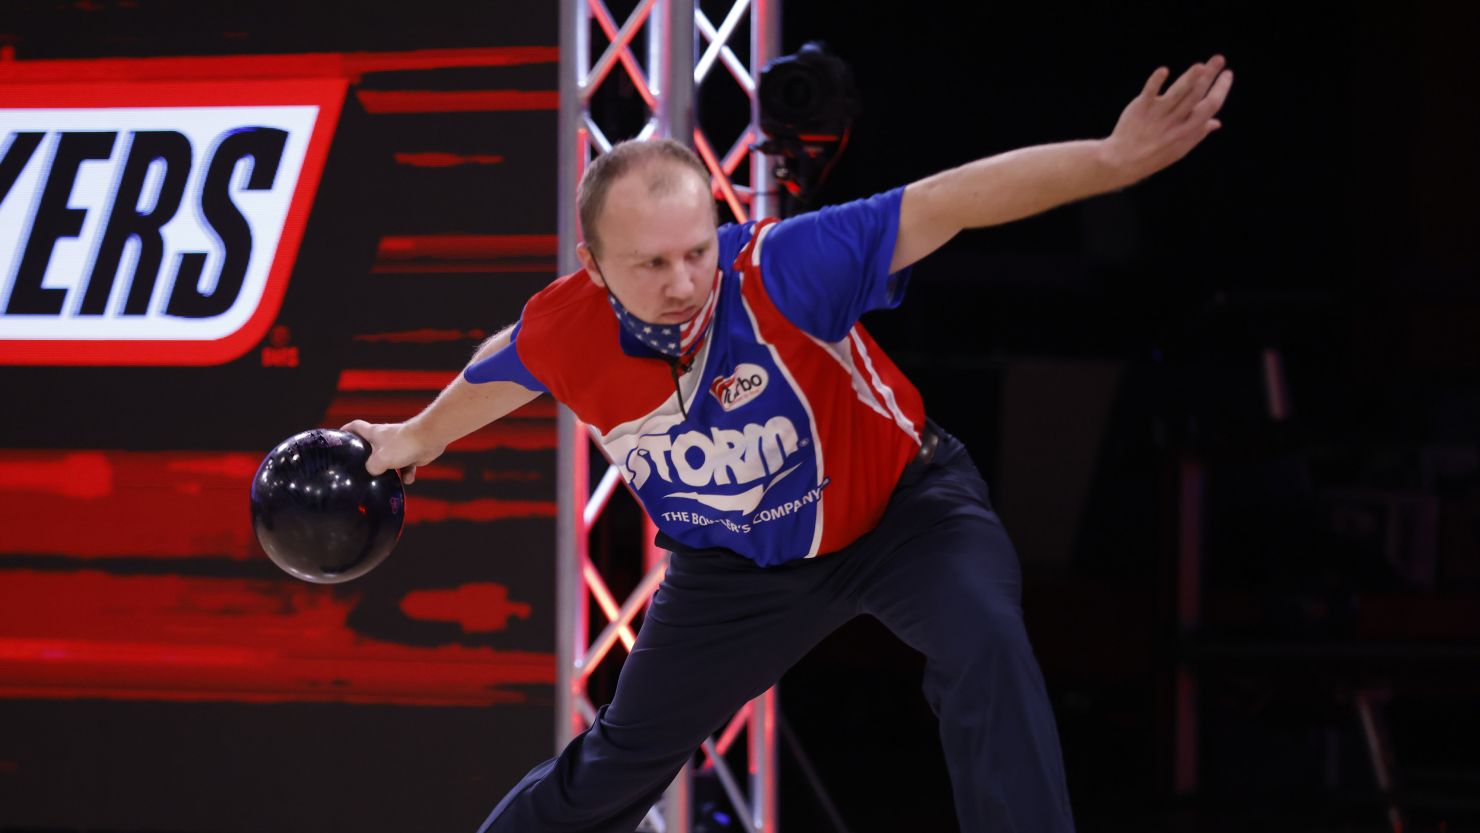 Brandon Novak bowls in the East Regional Finals at Bowlero Lanes on January 25, 2021.